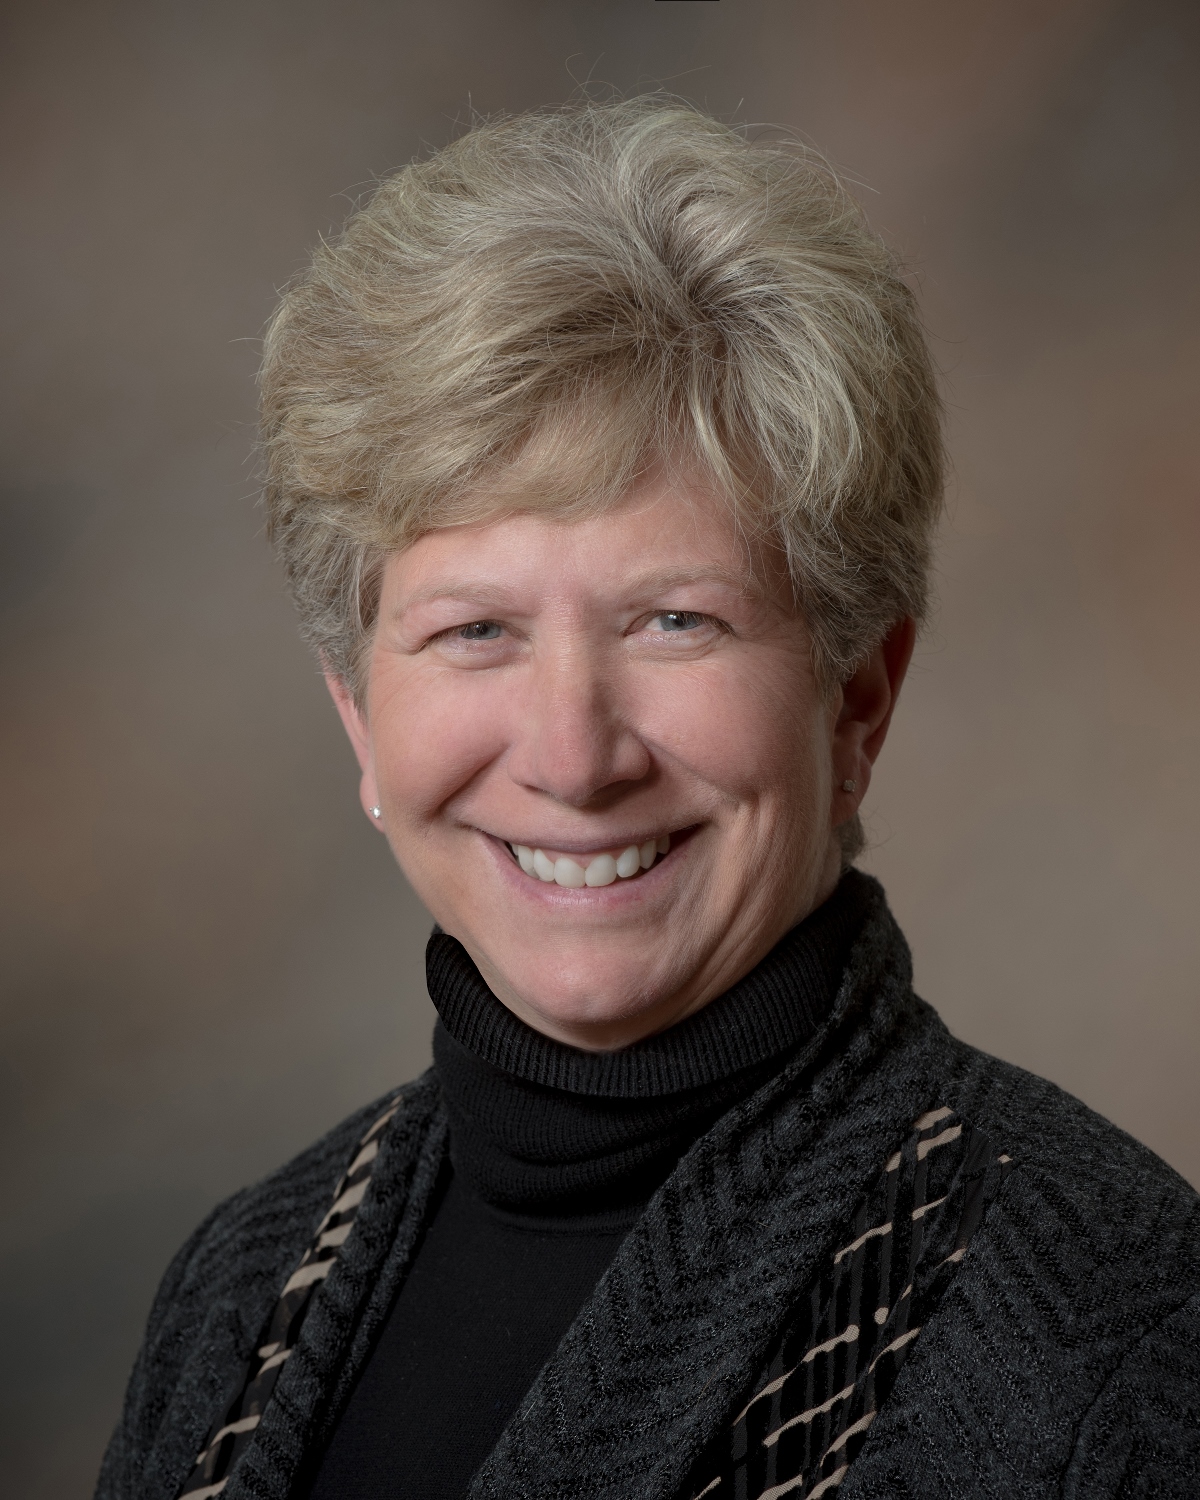 Sarah Cary Robinson is the vice president of advancement at Husson University.